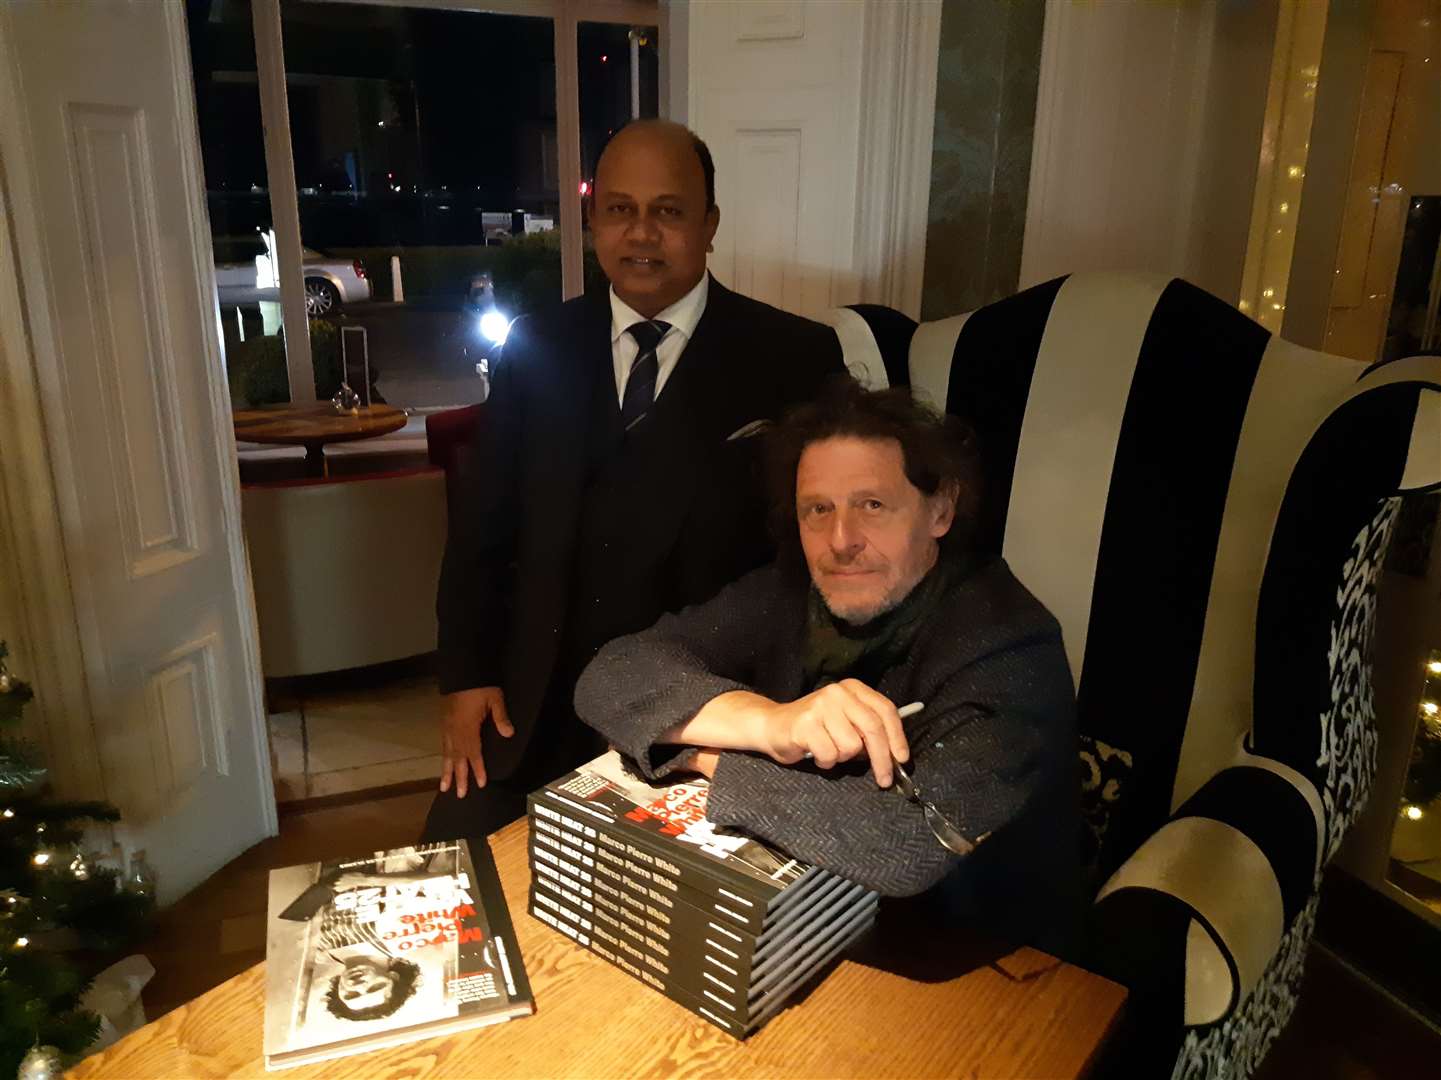 Celebrity chef Marco Pierre White this evening at the Best Western Plus Dover Marina Hotel and Spa with owner K. Rajaseelan